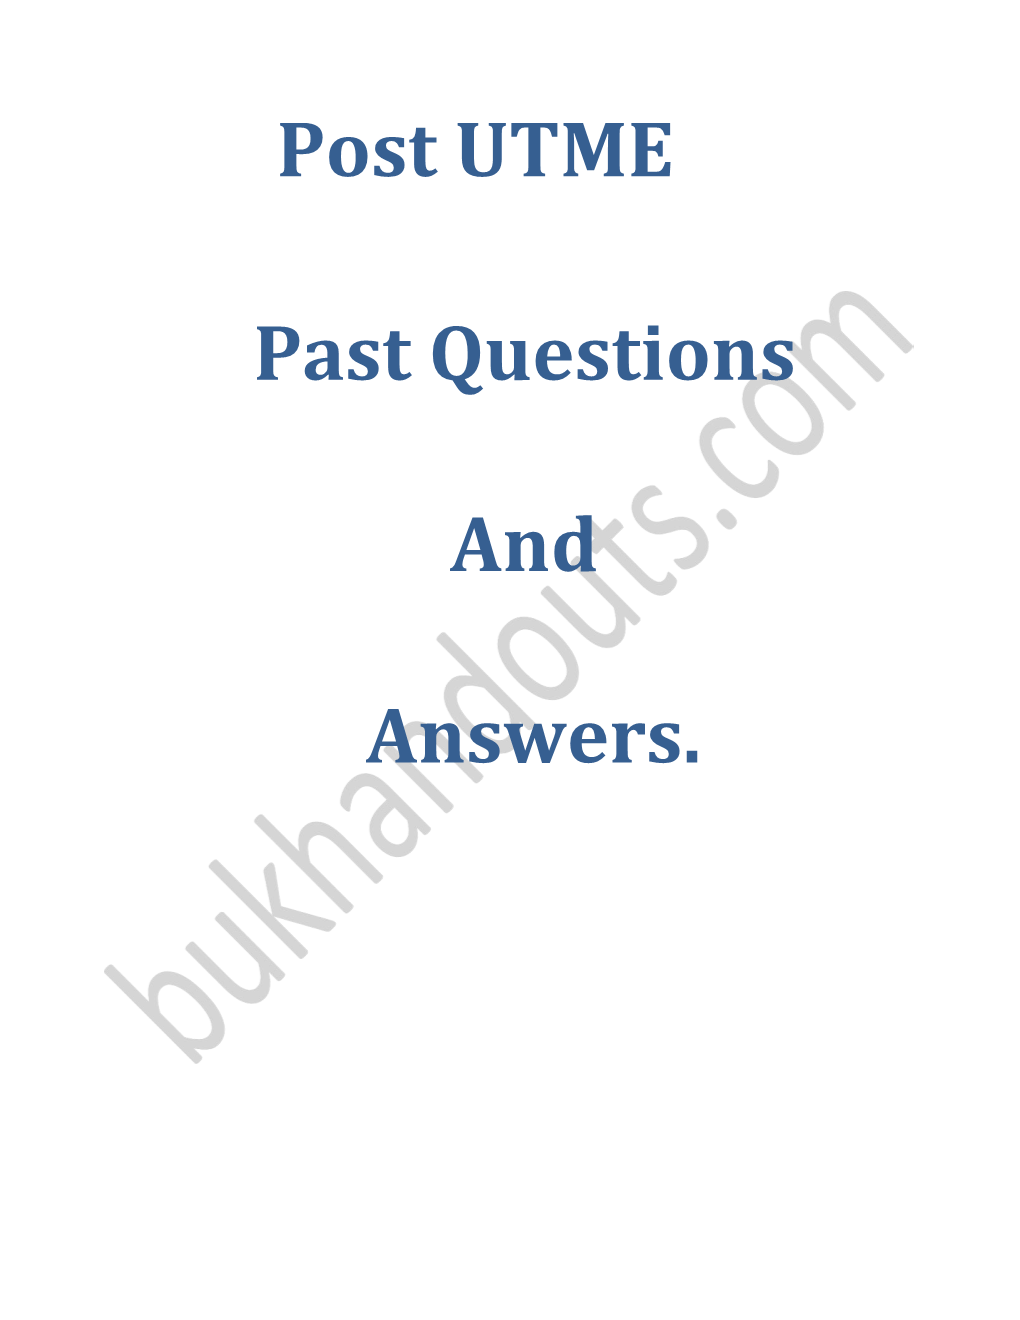 Post UTME Past Questions and Answers